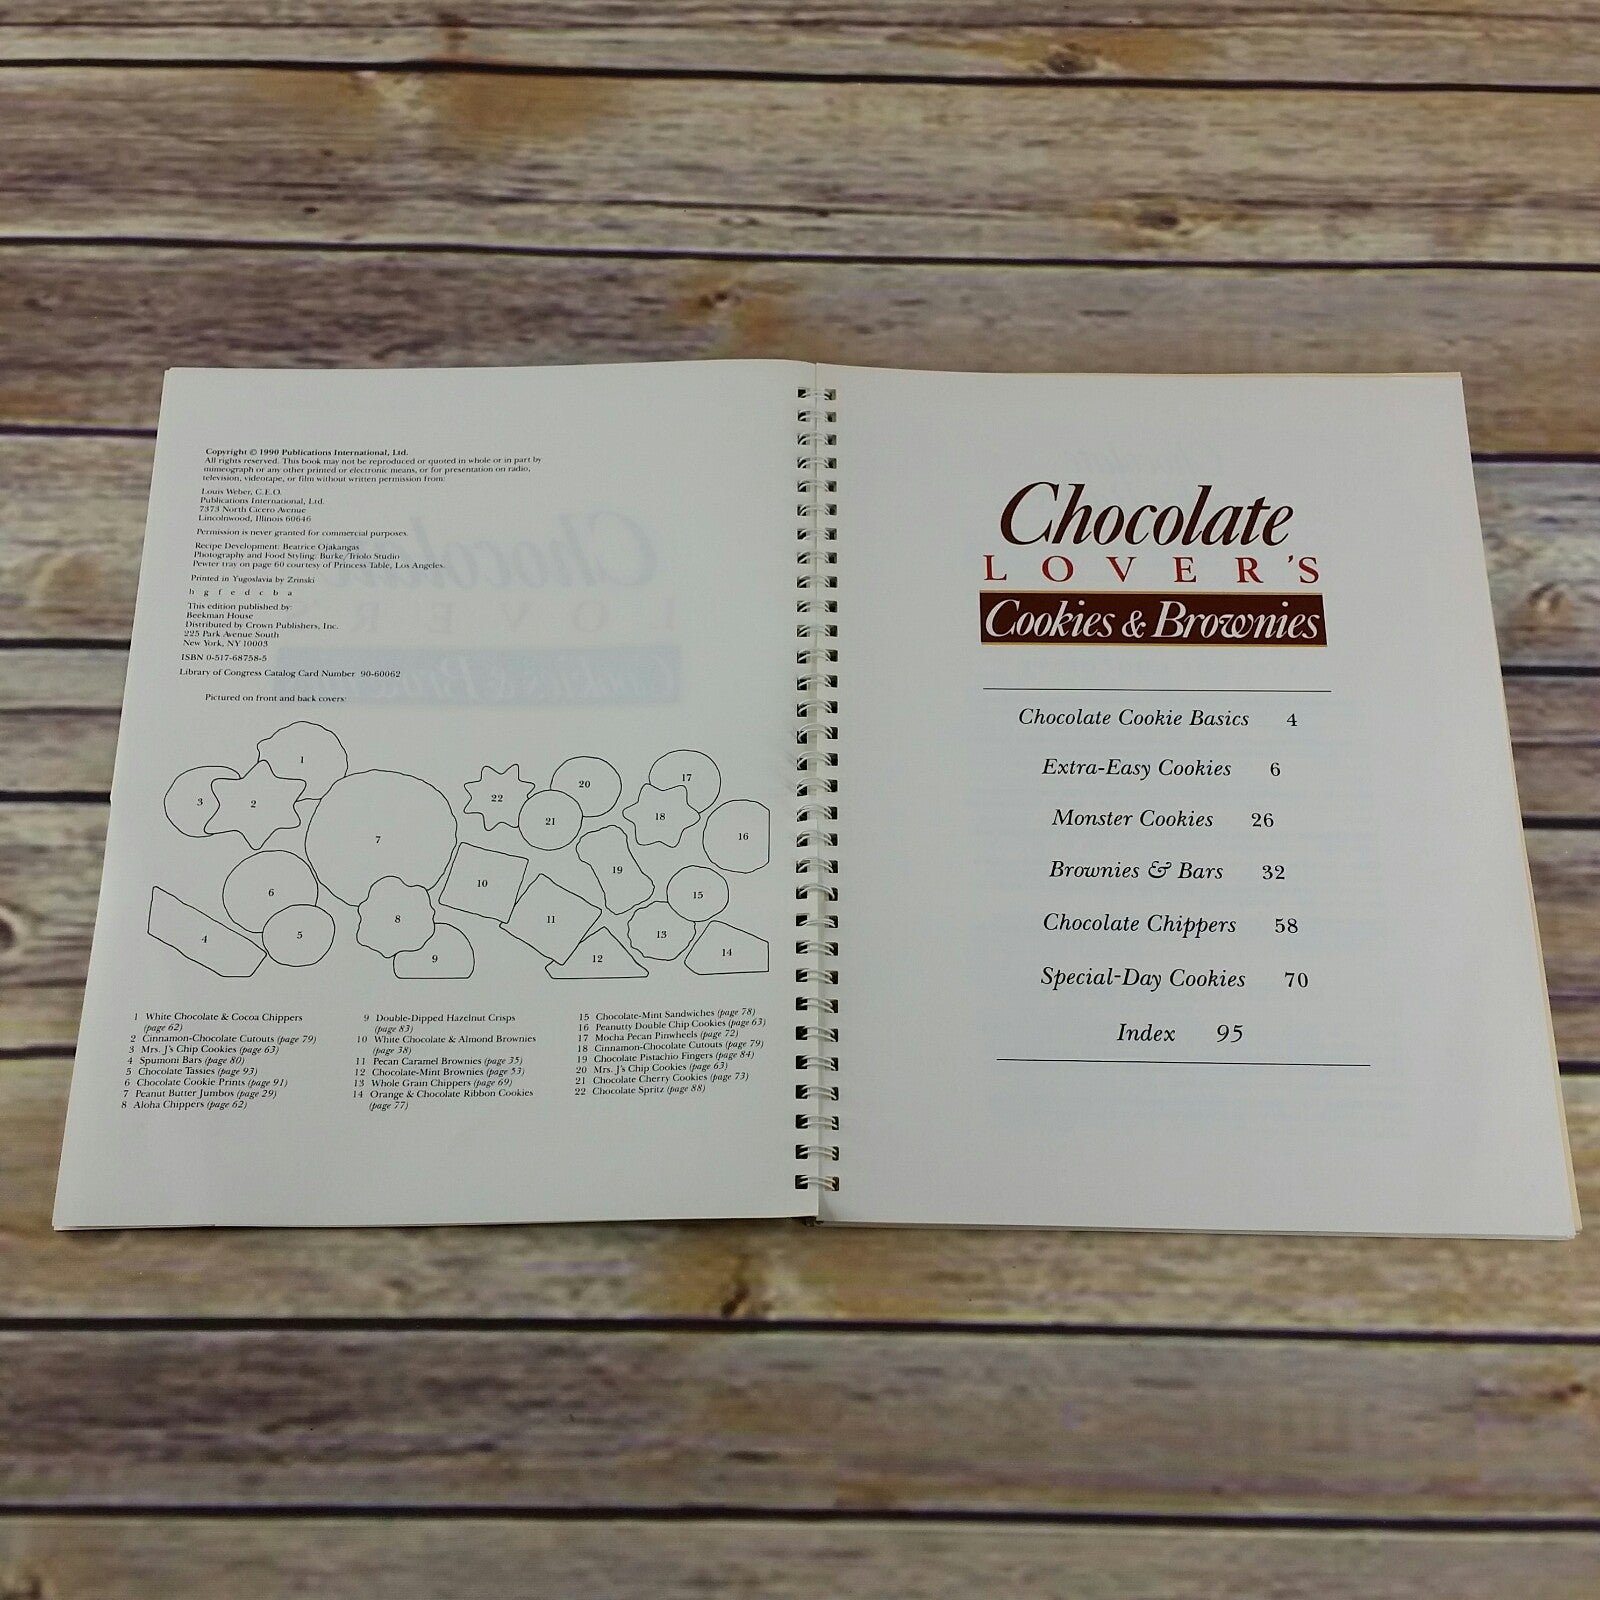 Vintage Cookbook Chocolate Lovers Cookies and Brownies Recipes Spiral Bound 1990 Beekman House - At Grandma's Table